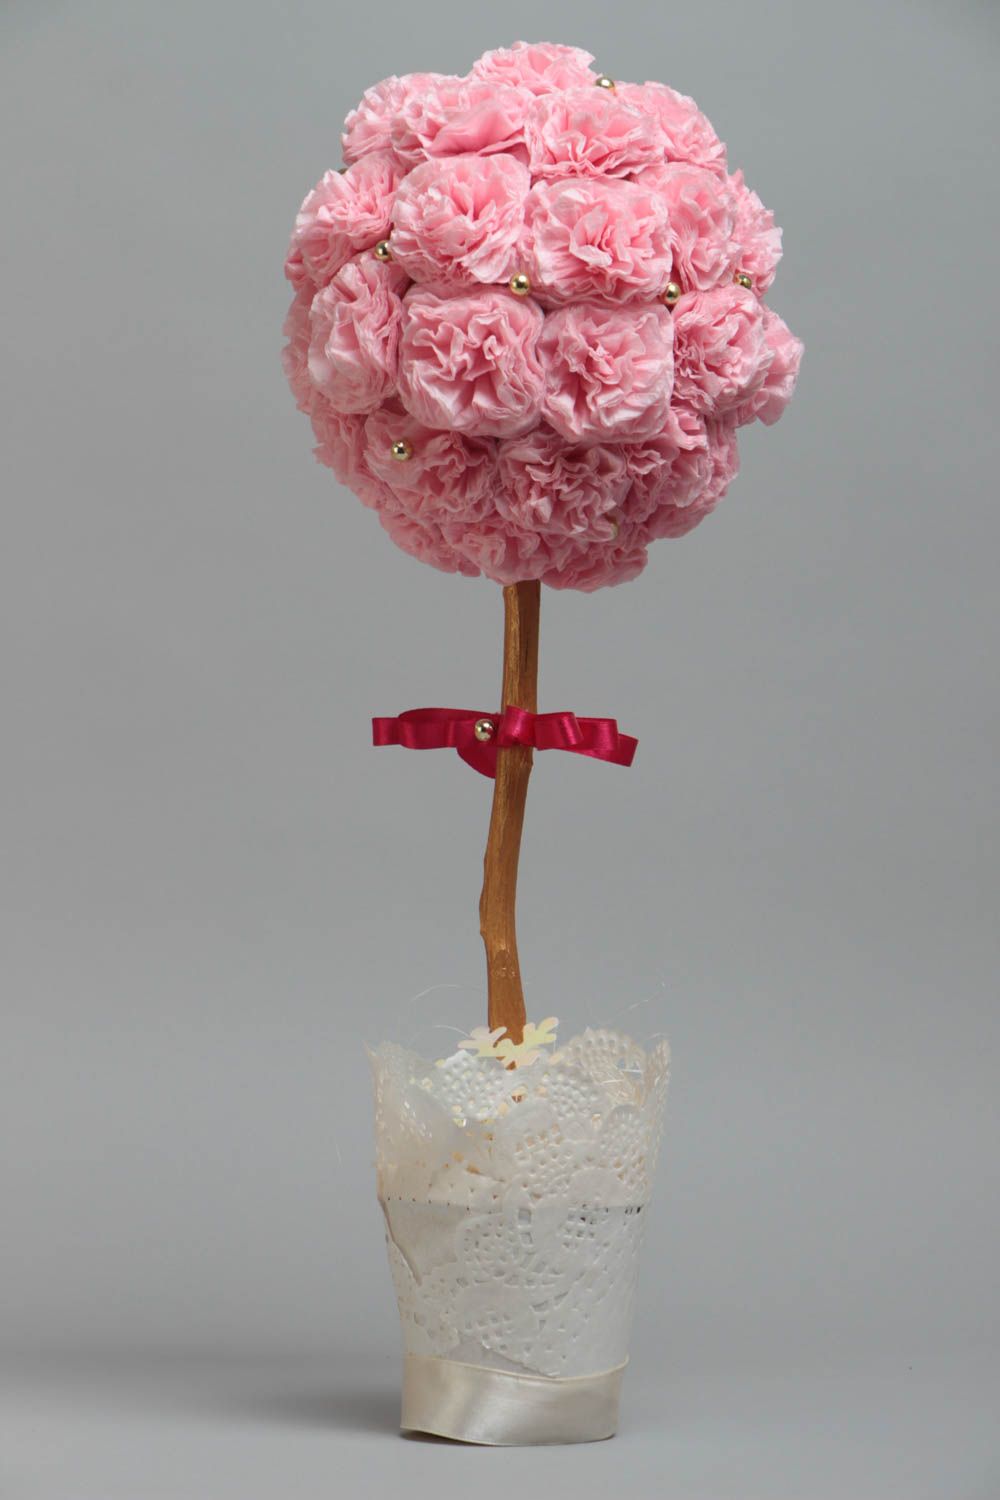 Handmade decorative tree topiary with napkins and satin ribbons in pink colors photo 2